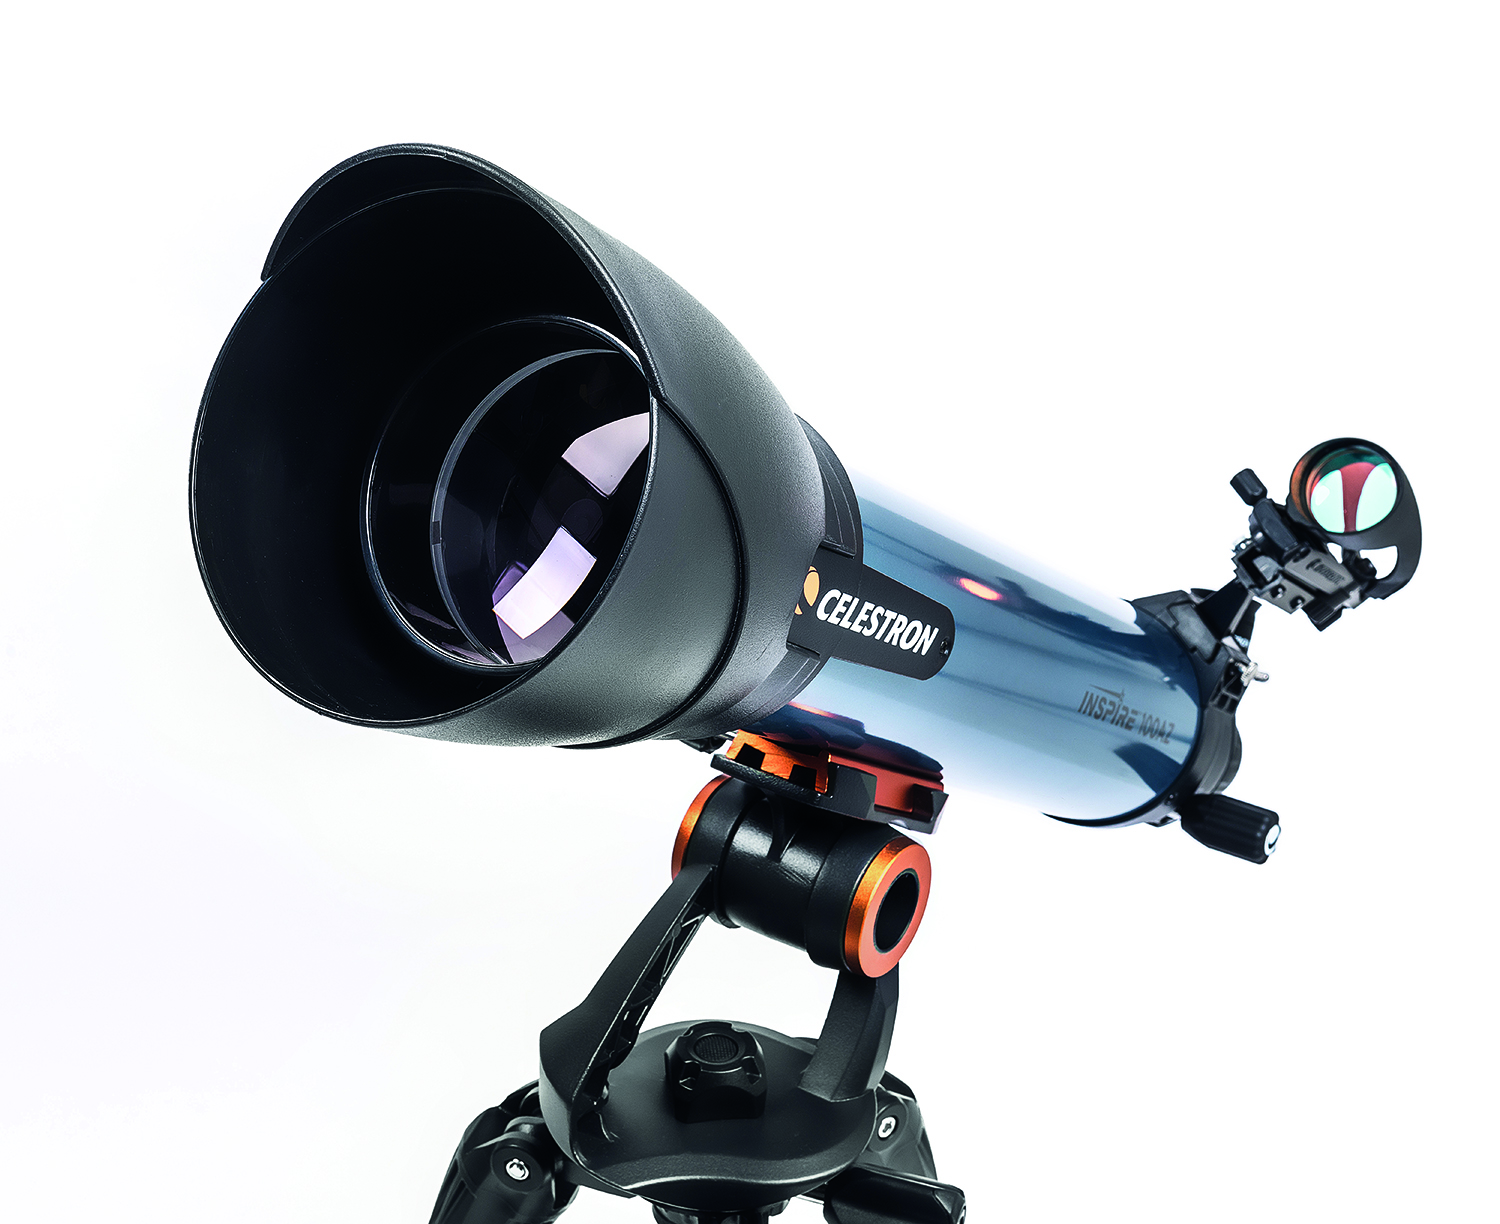 Celestron Inspire 100AZ refractor a great option for beginners and kids